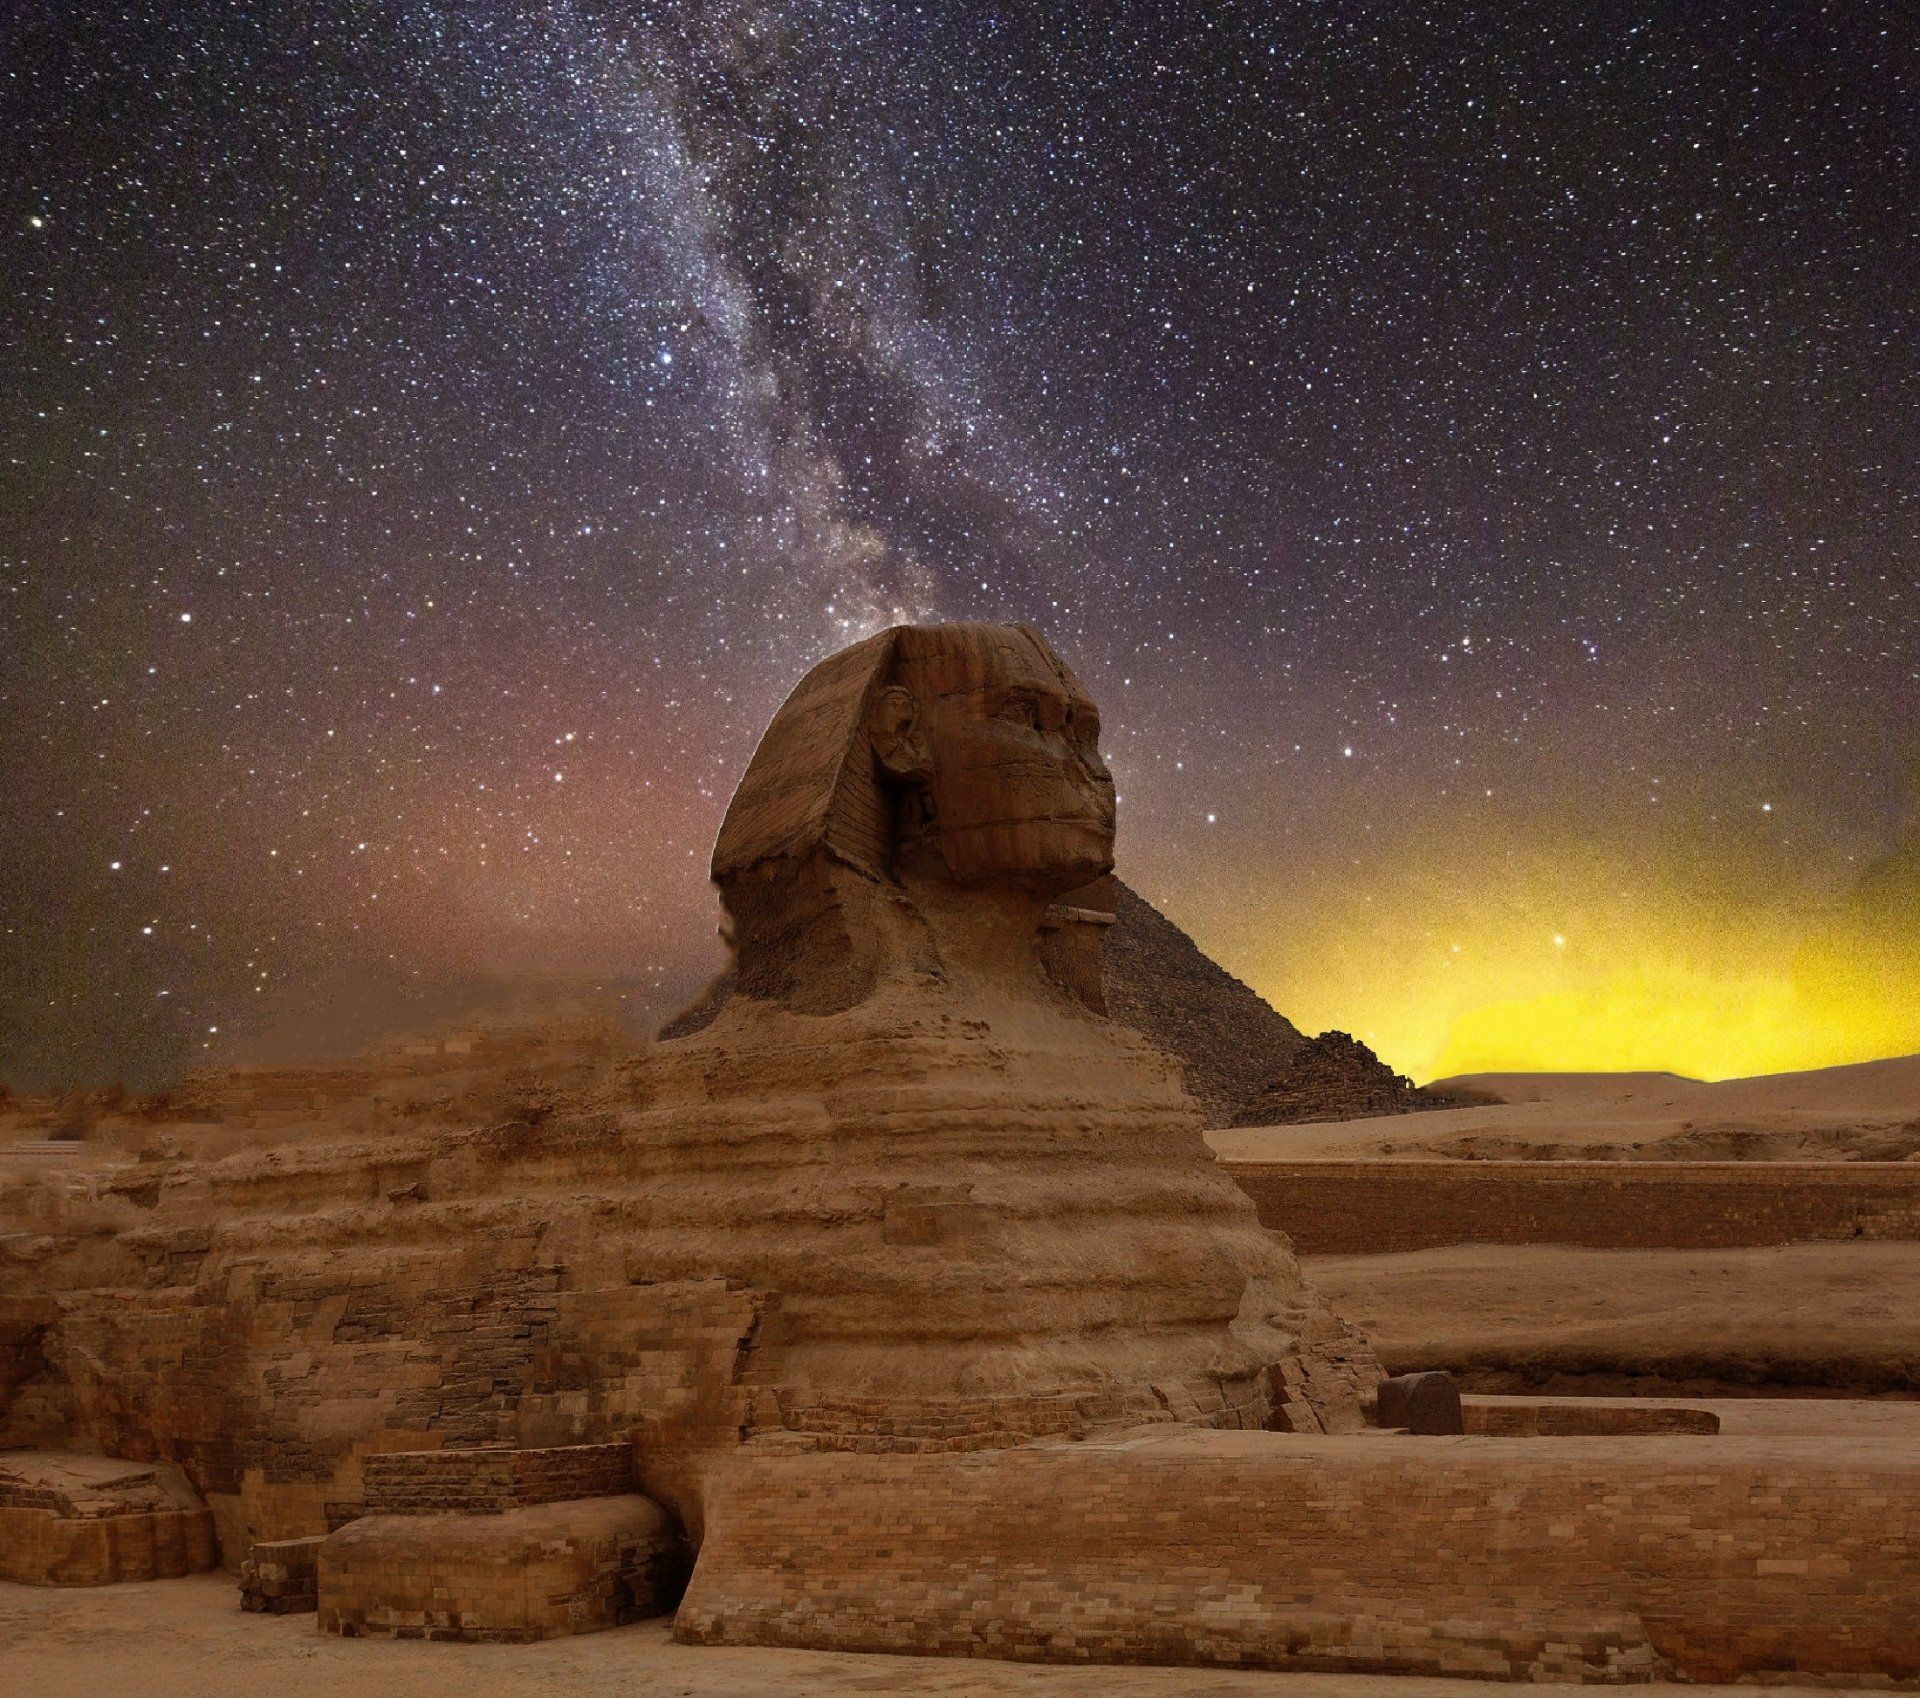 The Great Sphinx of Giza. Sphinx, Mythical Creature, Giza Plateau, West Bank of the Nile, Egypt, Sphinx Night Stars - Egypt Holidays Barter's Travelnet